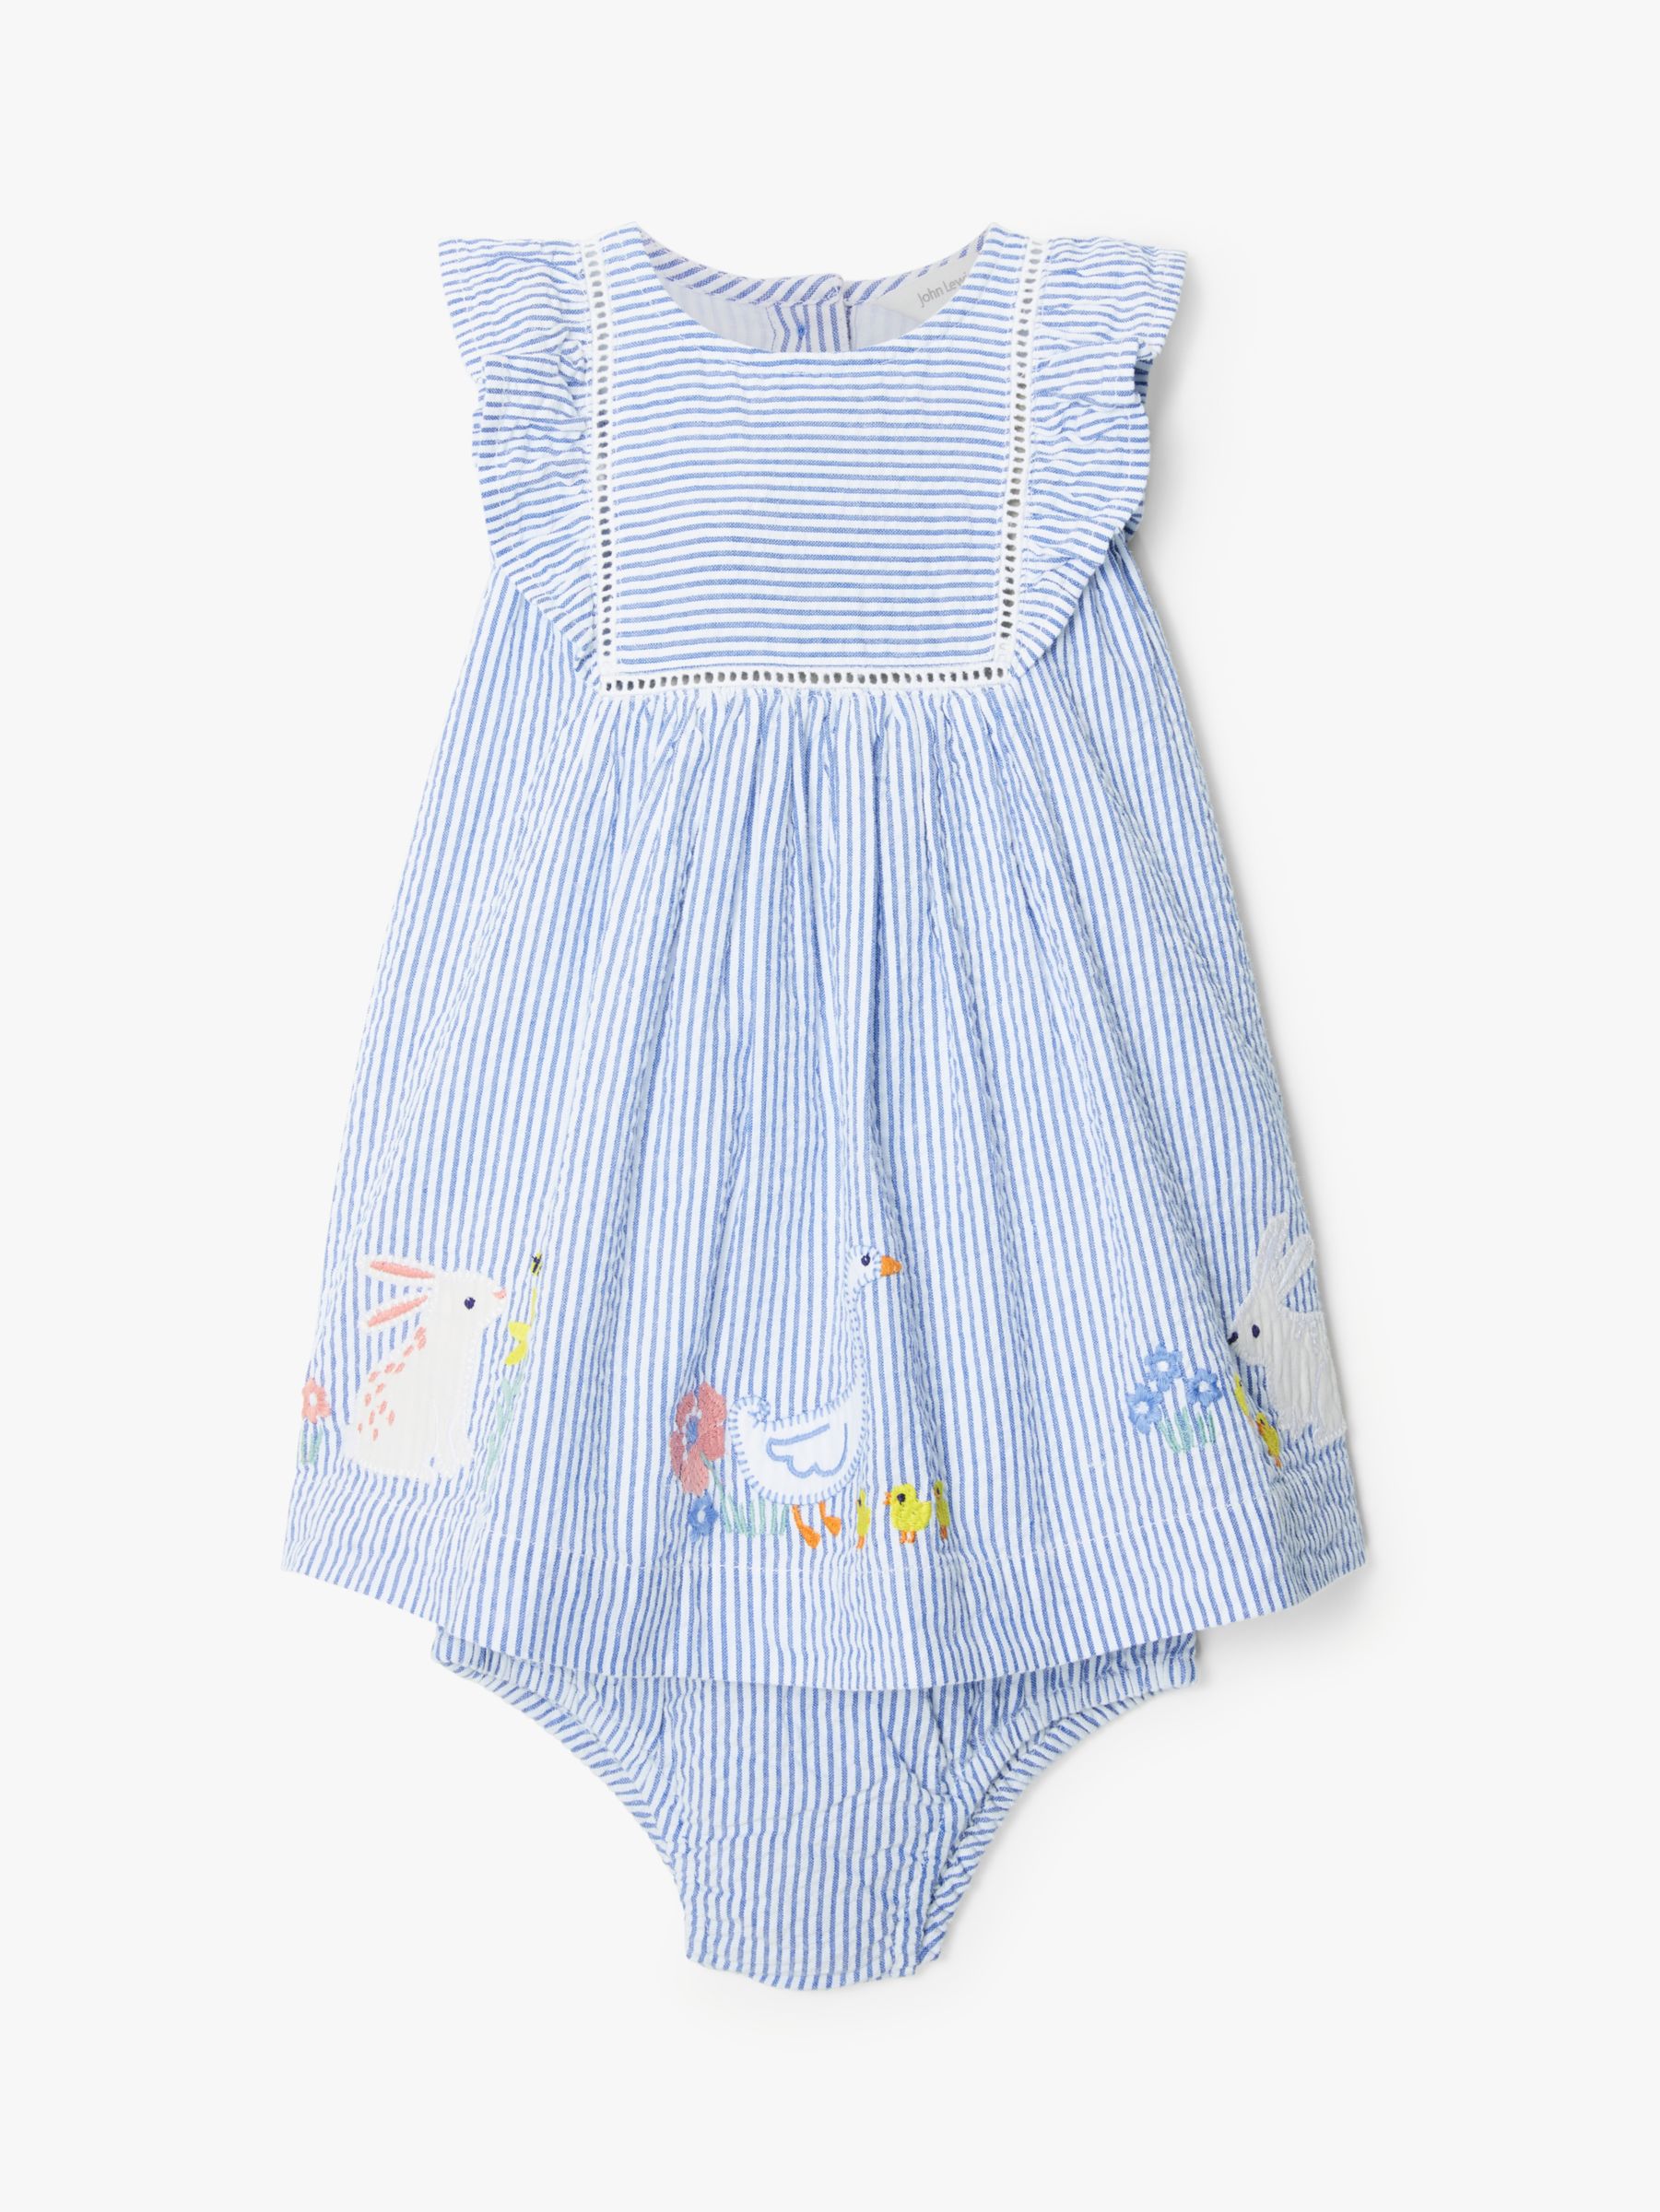 John Lewis & Partners Baby Bunny Stripe Dress and Knickers Set, Blue